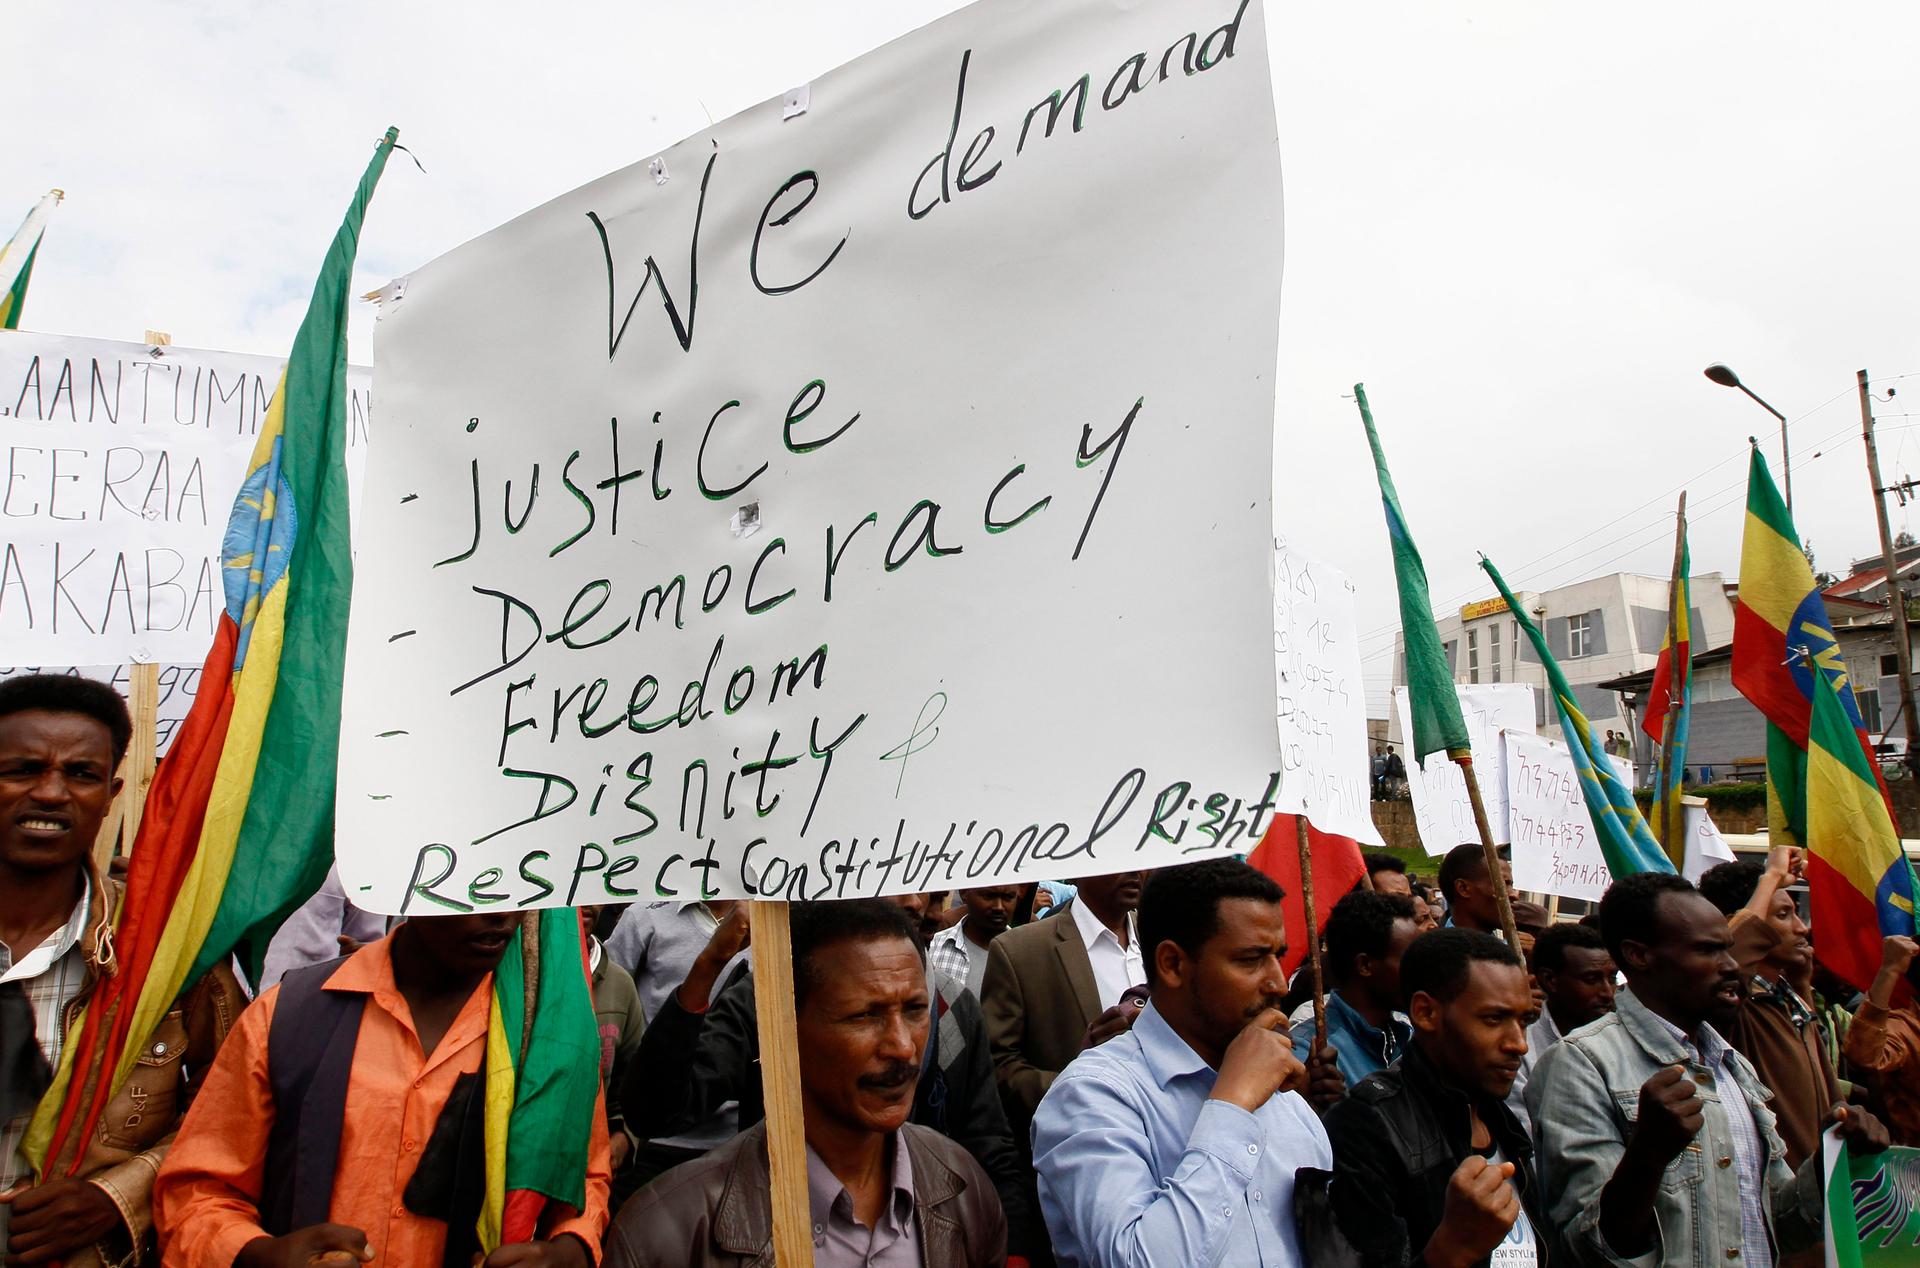 People attend a demonstration organized by opposition party the Ethiopian Federal Democratic Unity Forum in Ethiopia's capital of Addis Ababa, May 24, 2014.